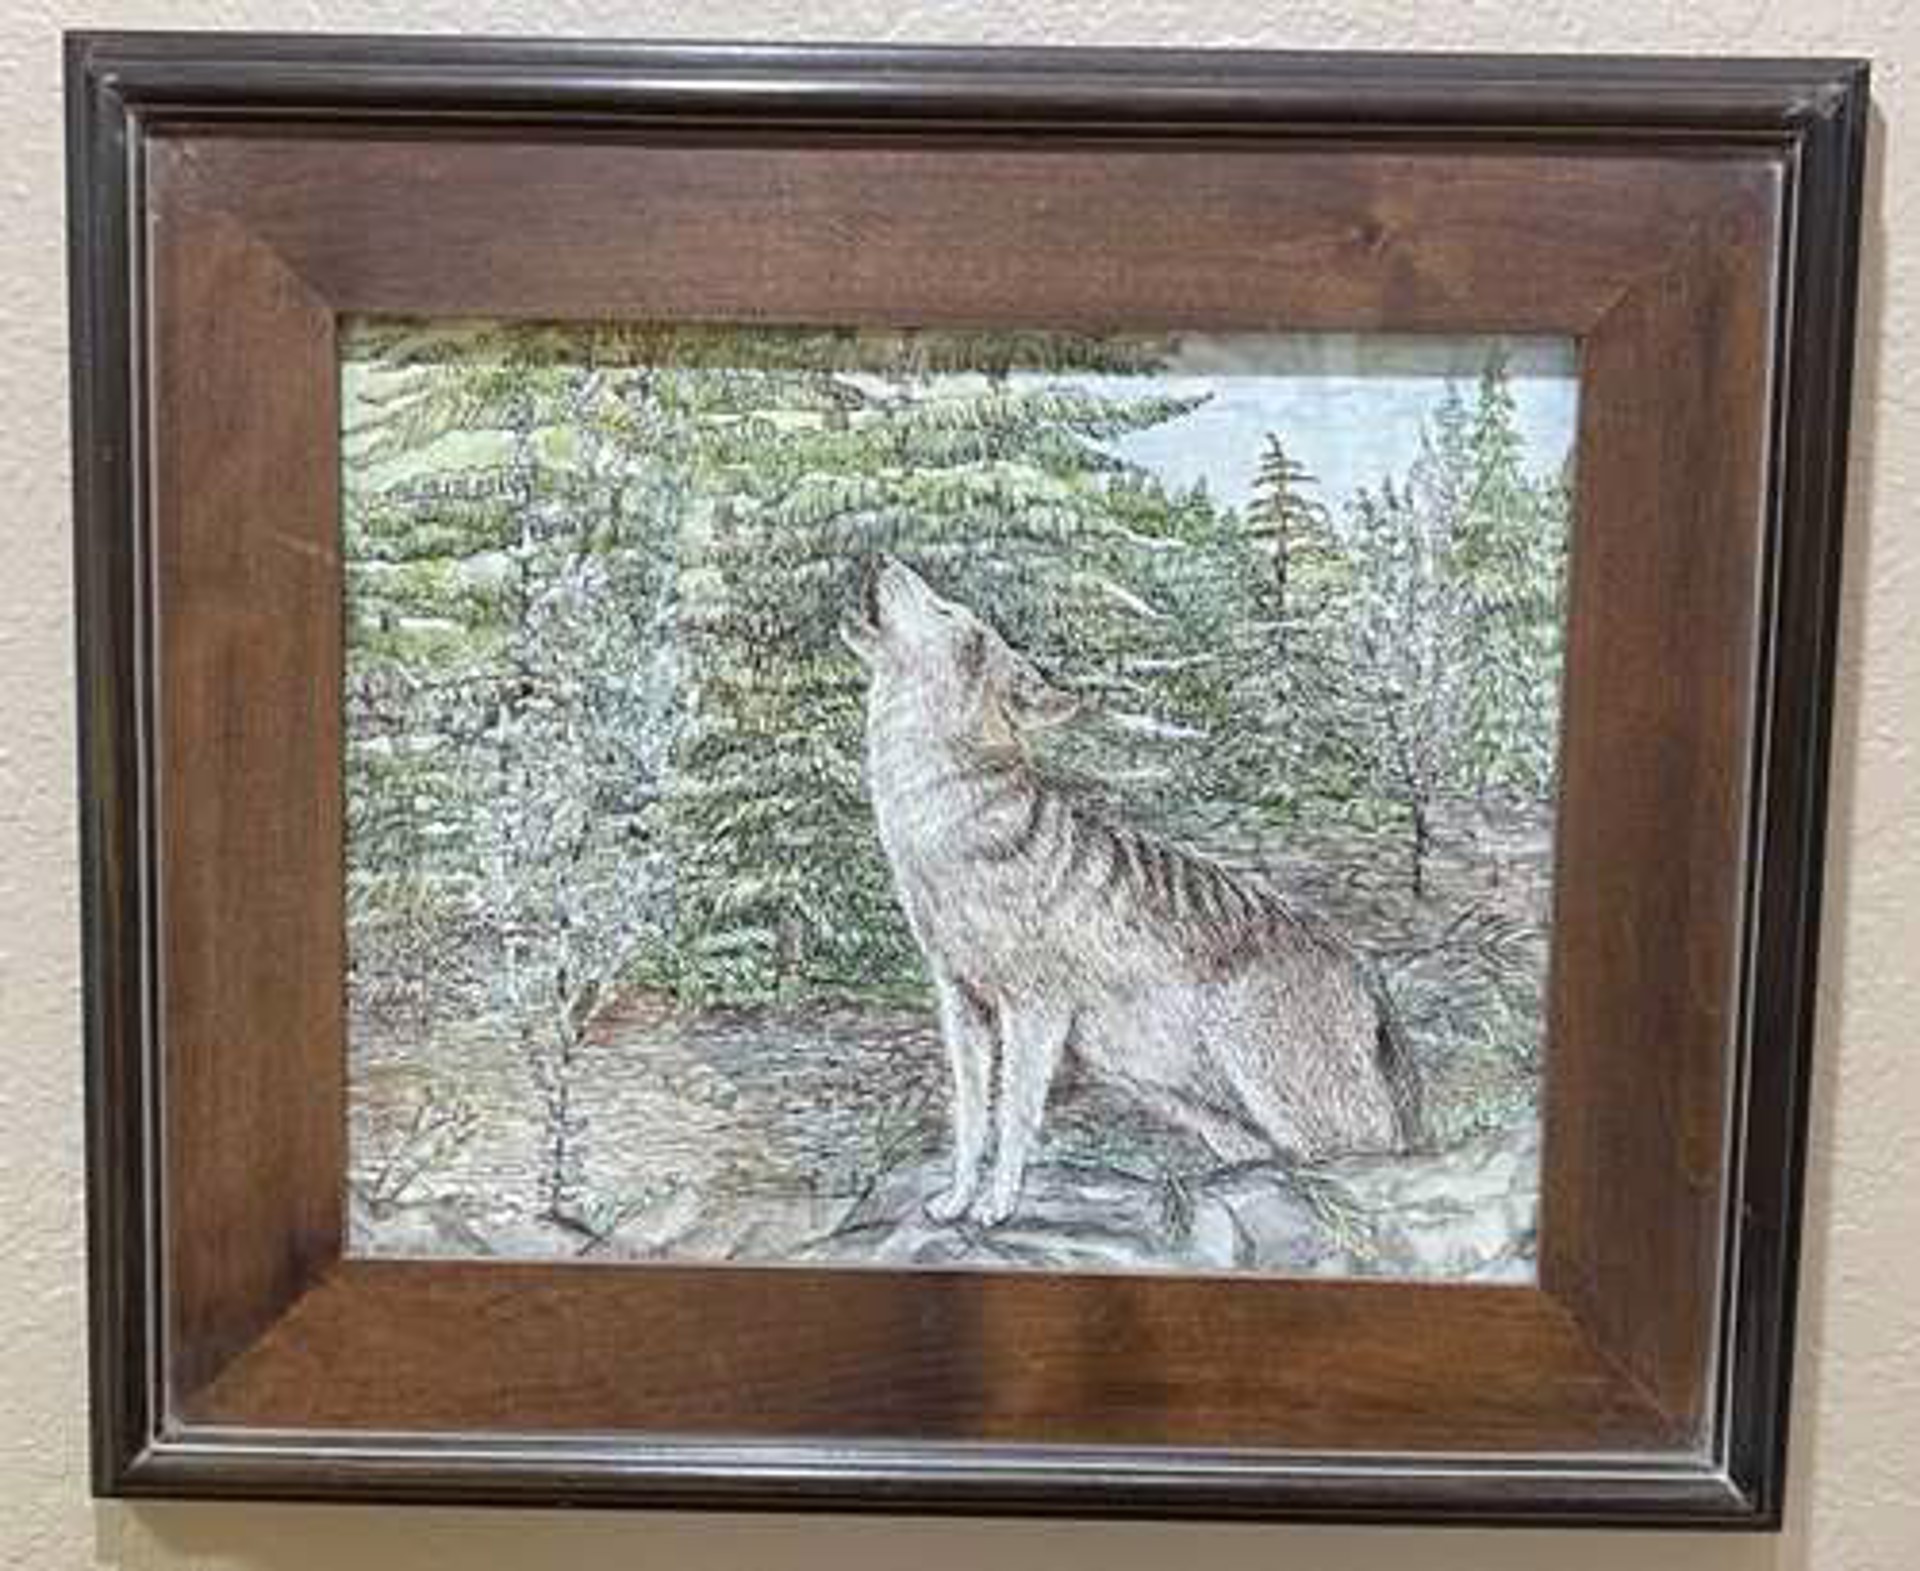 Song of the Wolf by Cynthia Jewell Pollett